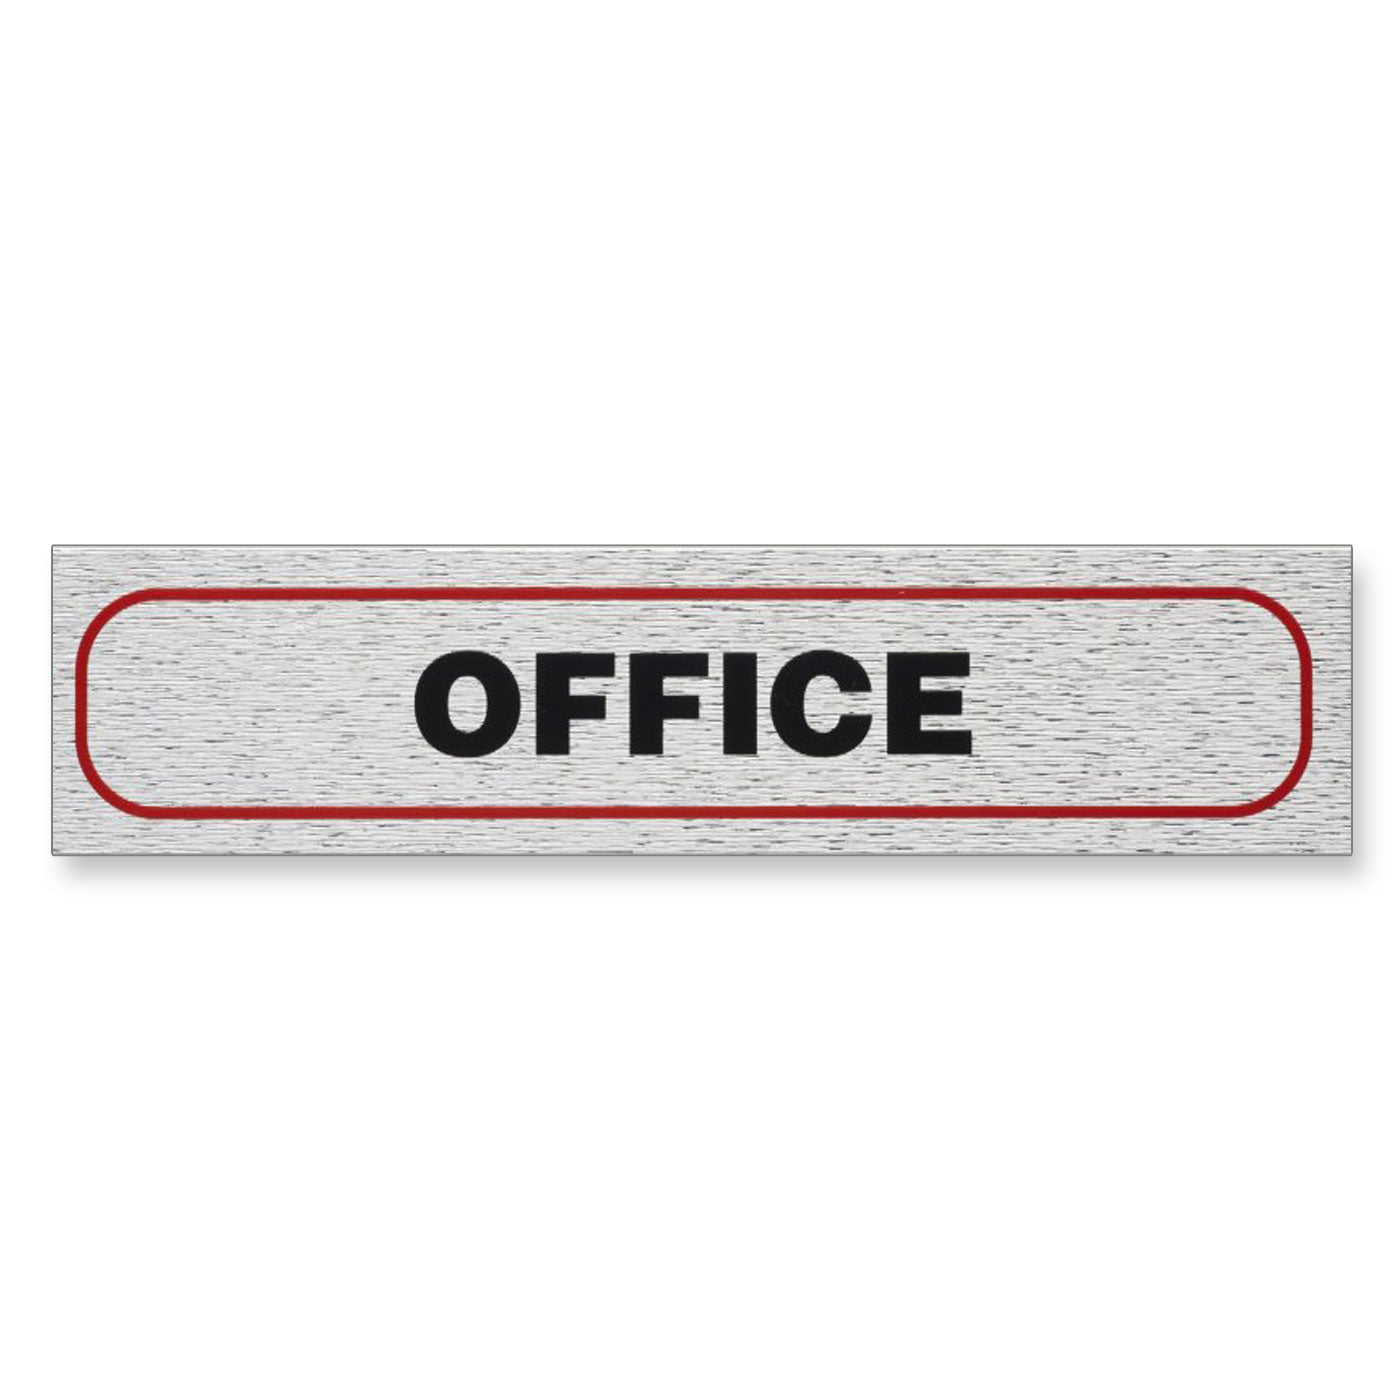 Information Sign "OFFICE" 17 x 4 cm [Self-Adhesive]